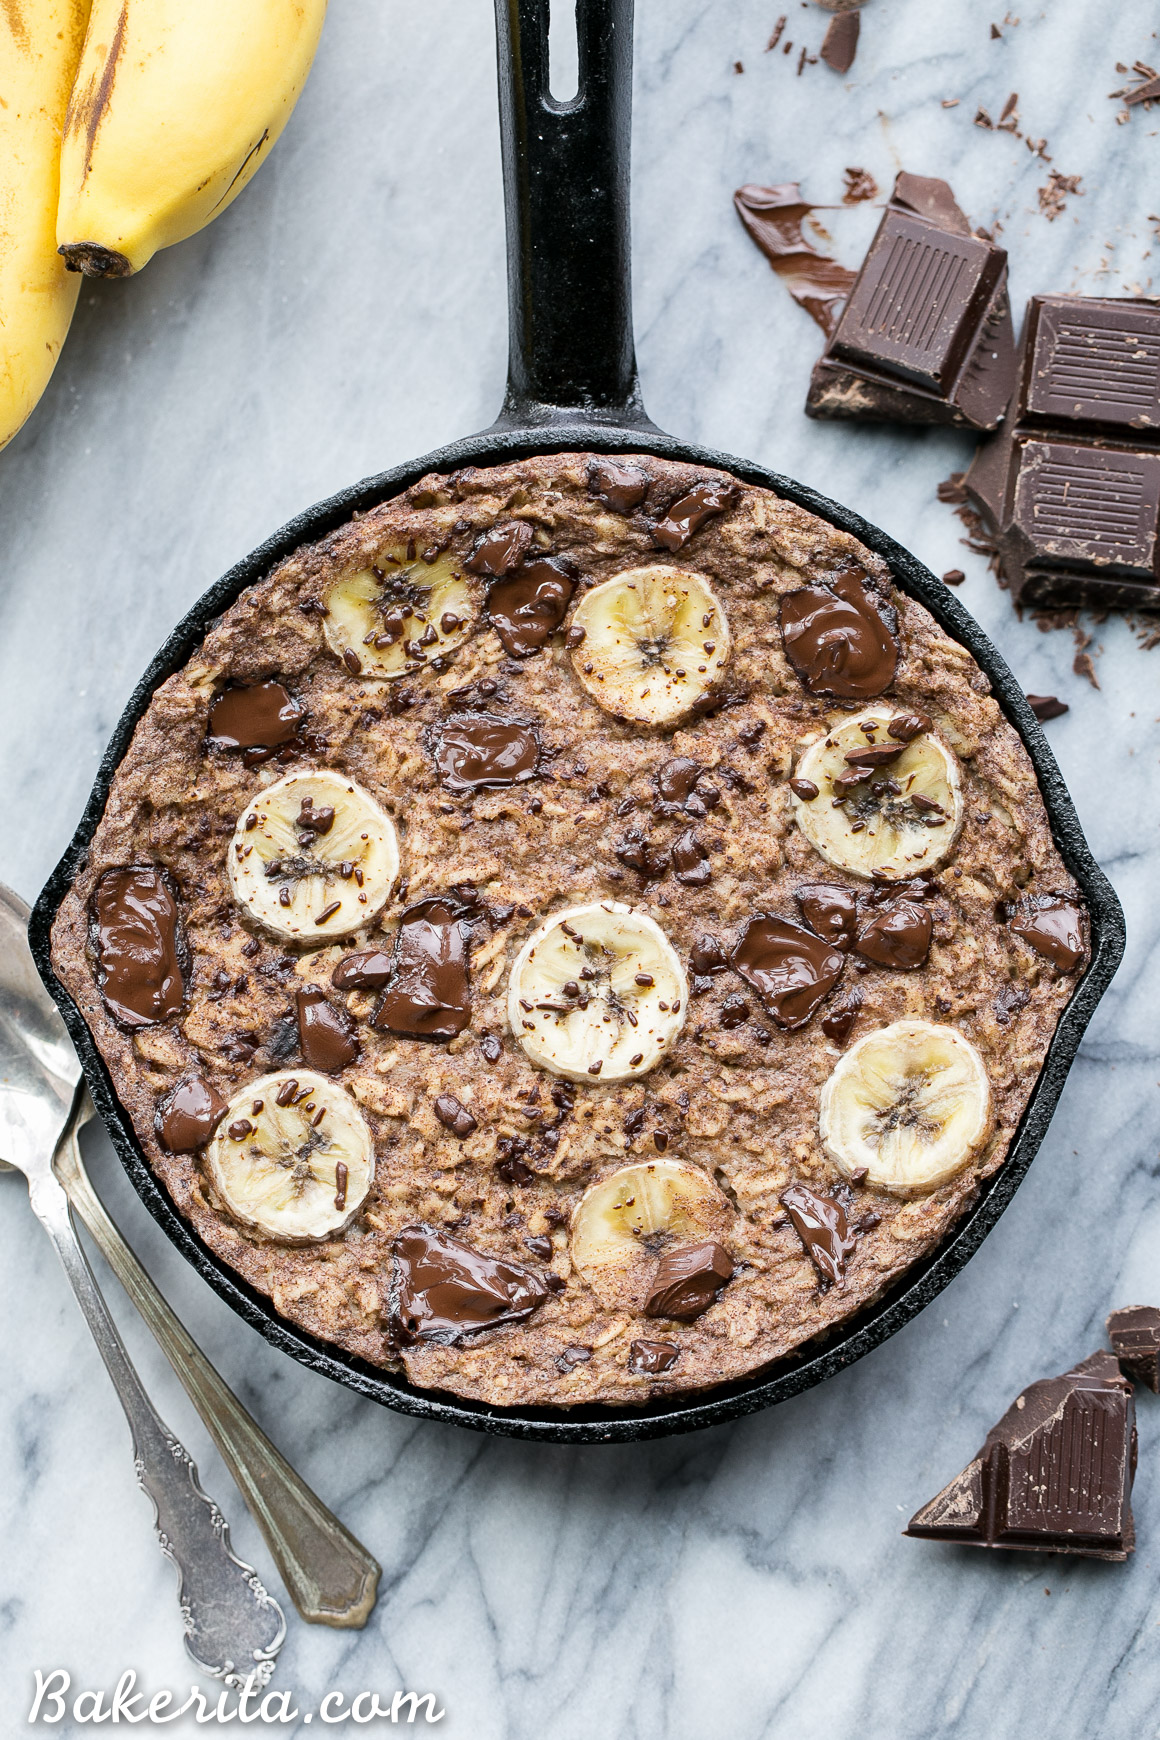 This easy Chocolate Chunk Banana Baked Oatmeal is a delicious twist on classic oatmeal - you'll definitely want to start your day with a serving of this gluten-free + vegan breakfast! This healthier oatmeal has no added sweetener; it's sweetened entirely with ripe banana and chocolate chunks.